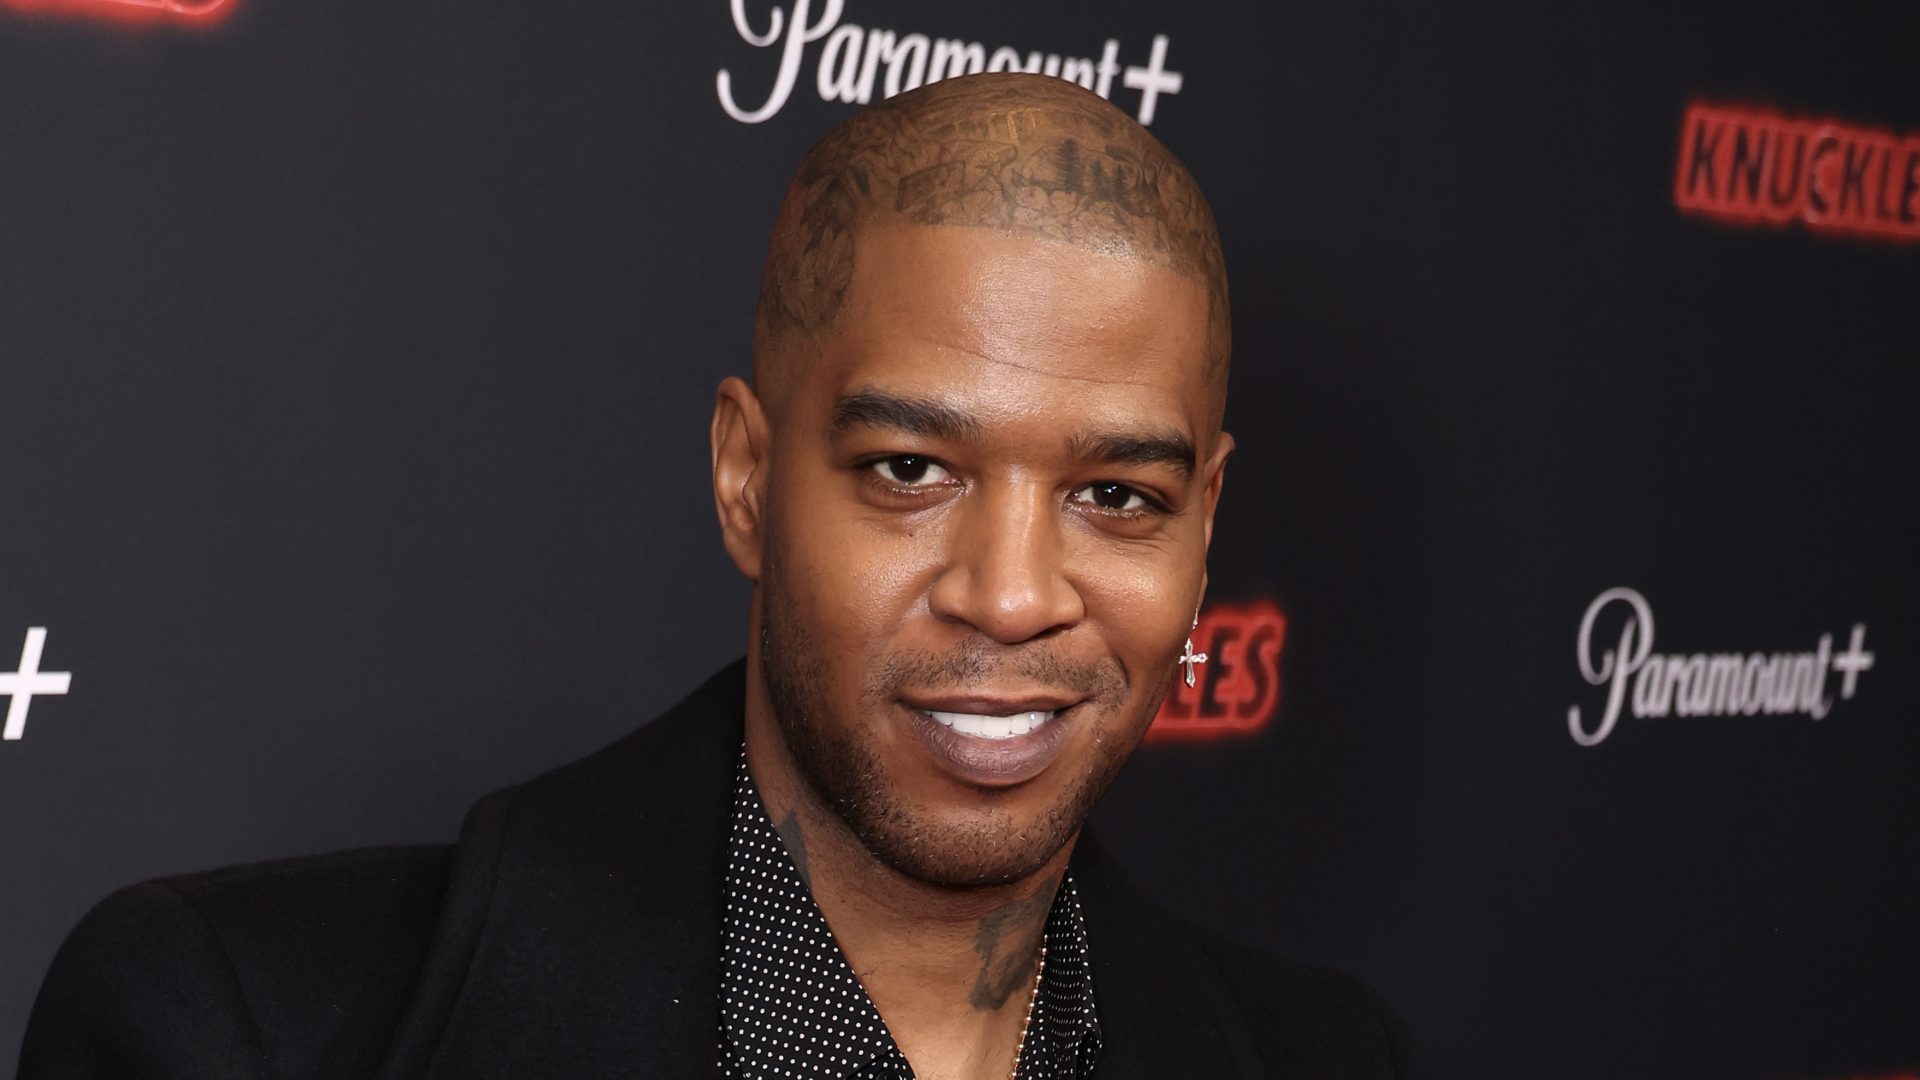 LONDON, ENGLAND - APRIL 16: Kid Cudi attends the global premiere of Paramount+ series "Knuckles" on April 16, 2024 in London, England. Knuckles will be streaming exclusively on Paramount+